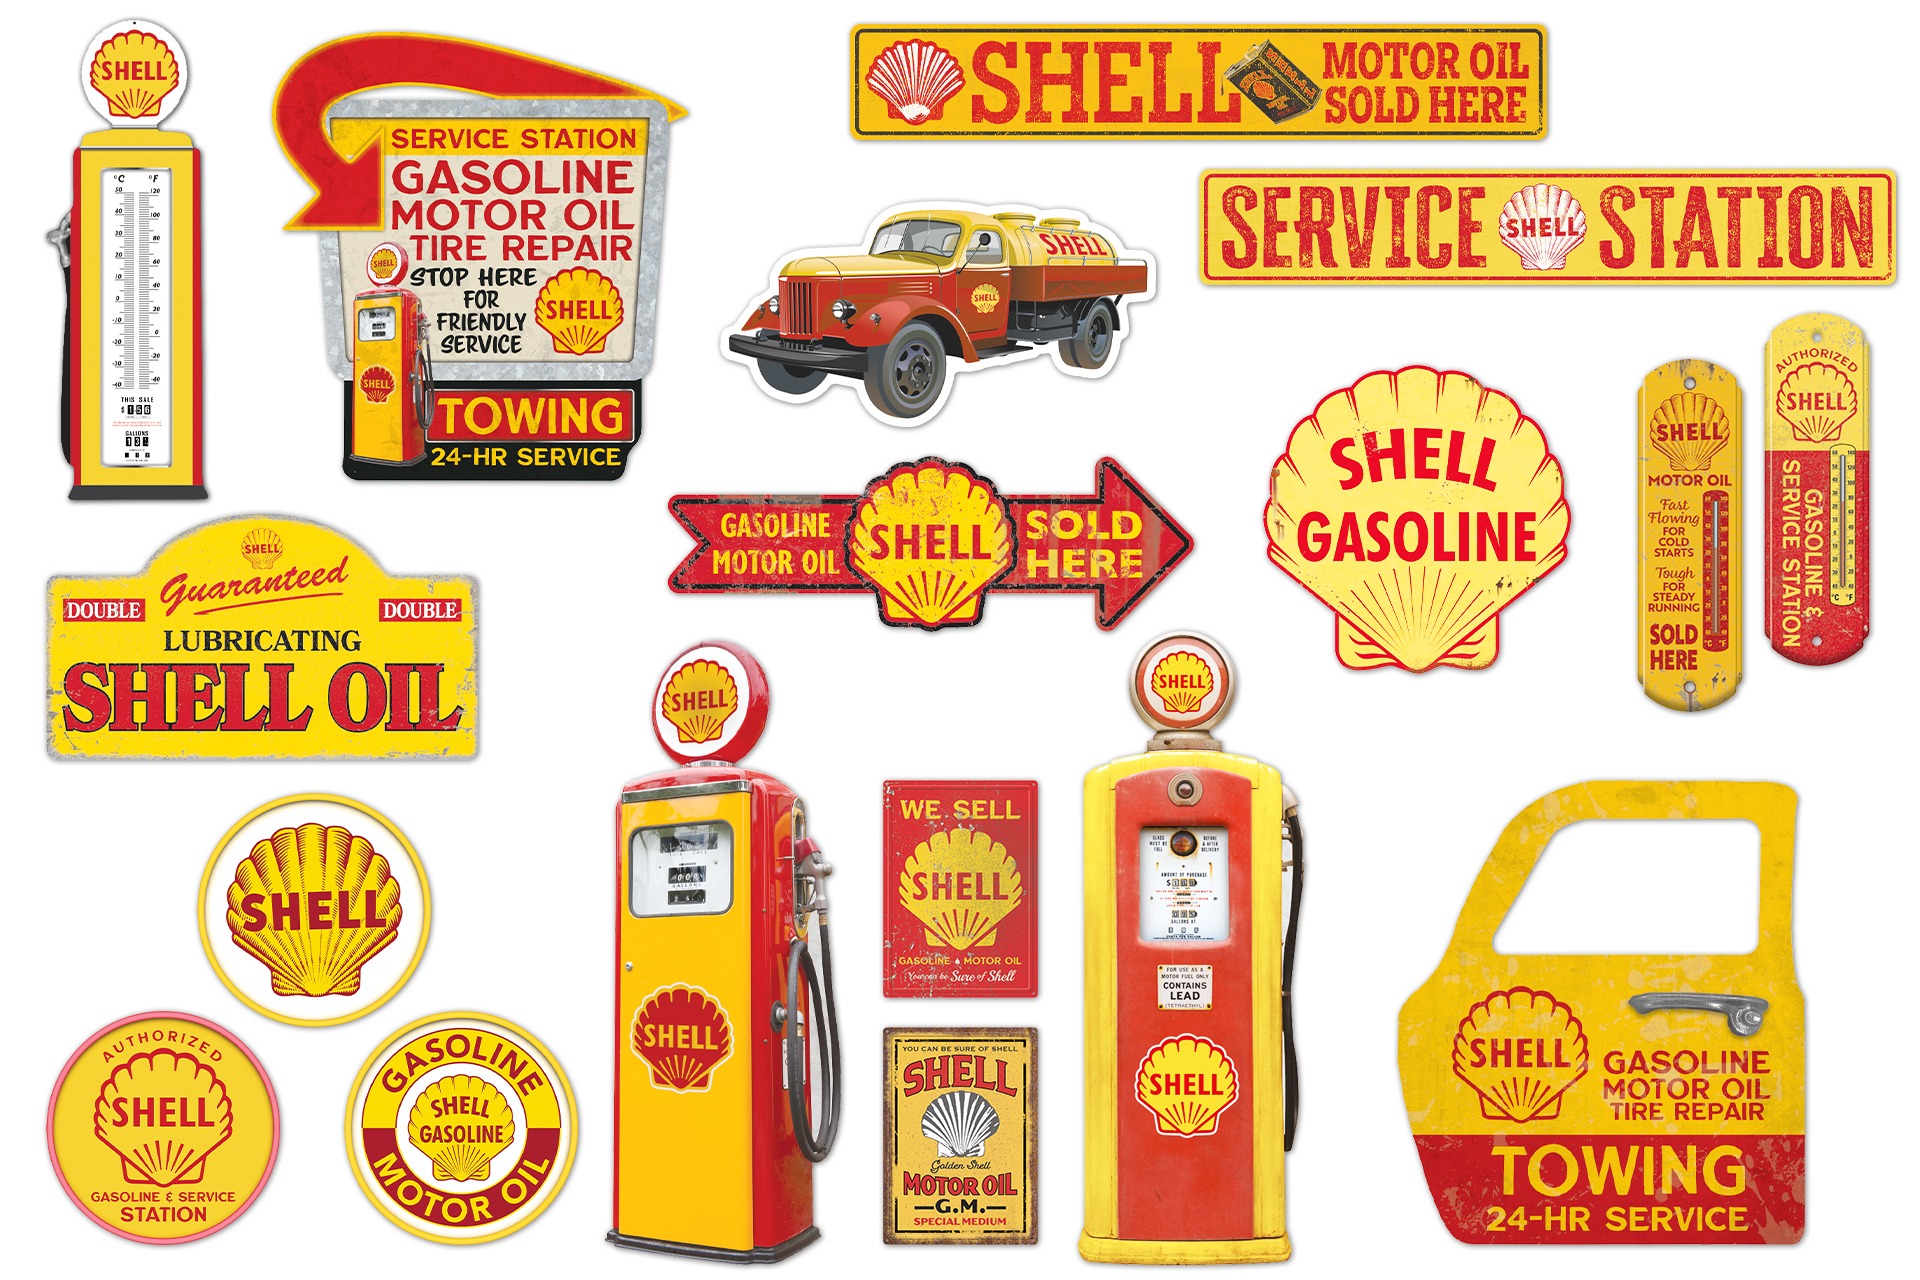 Officially Licensed Products From Shell 397